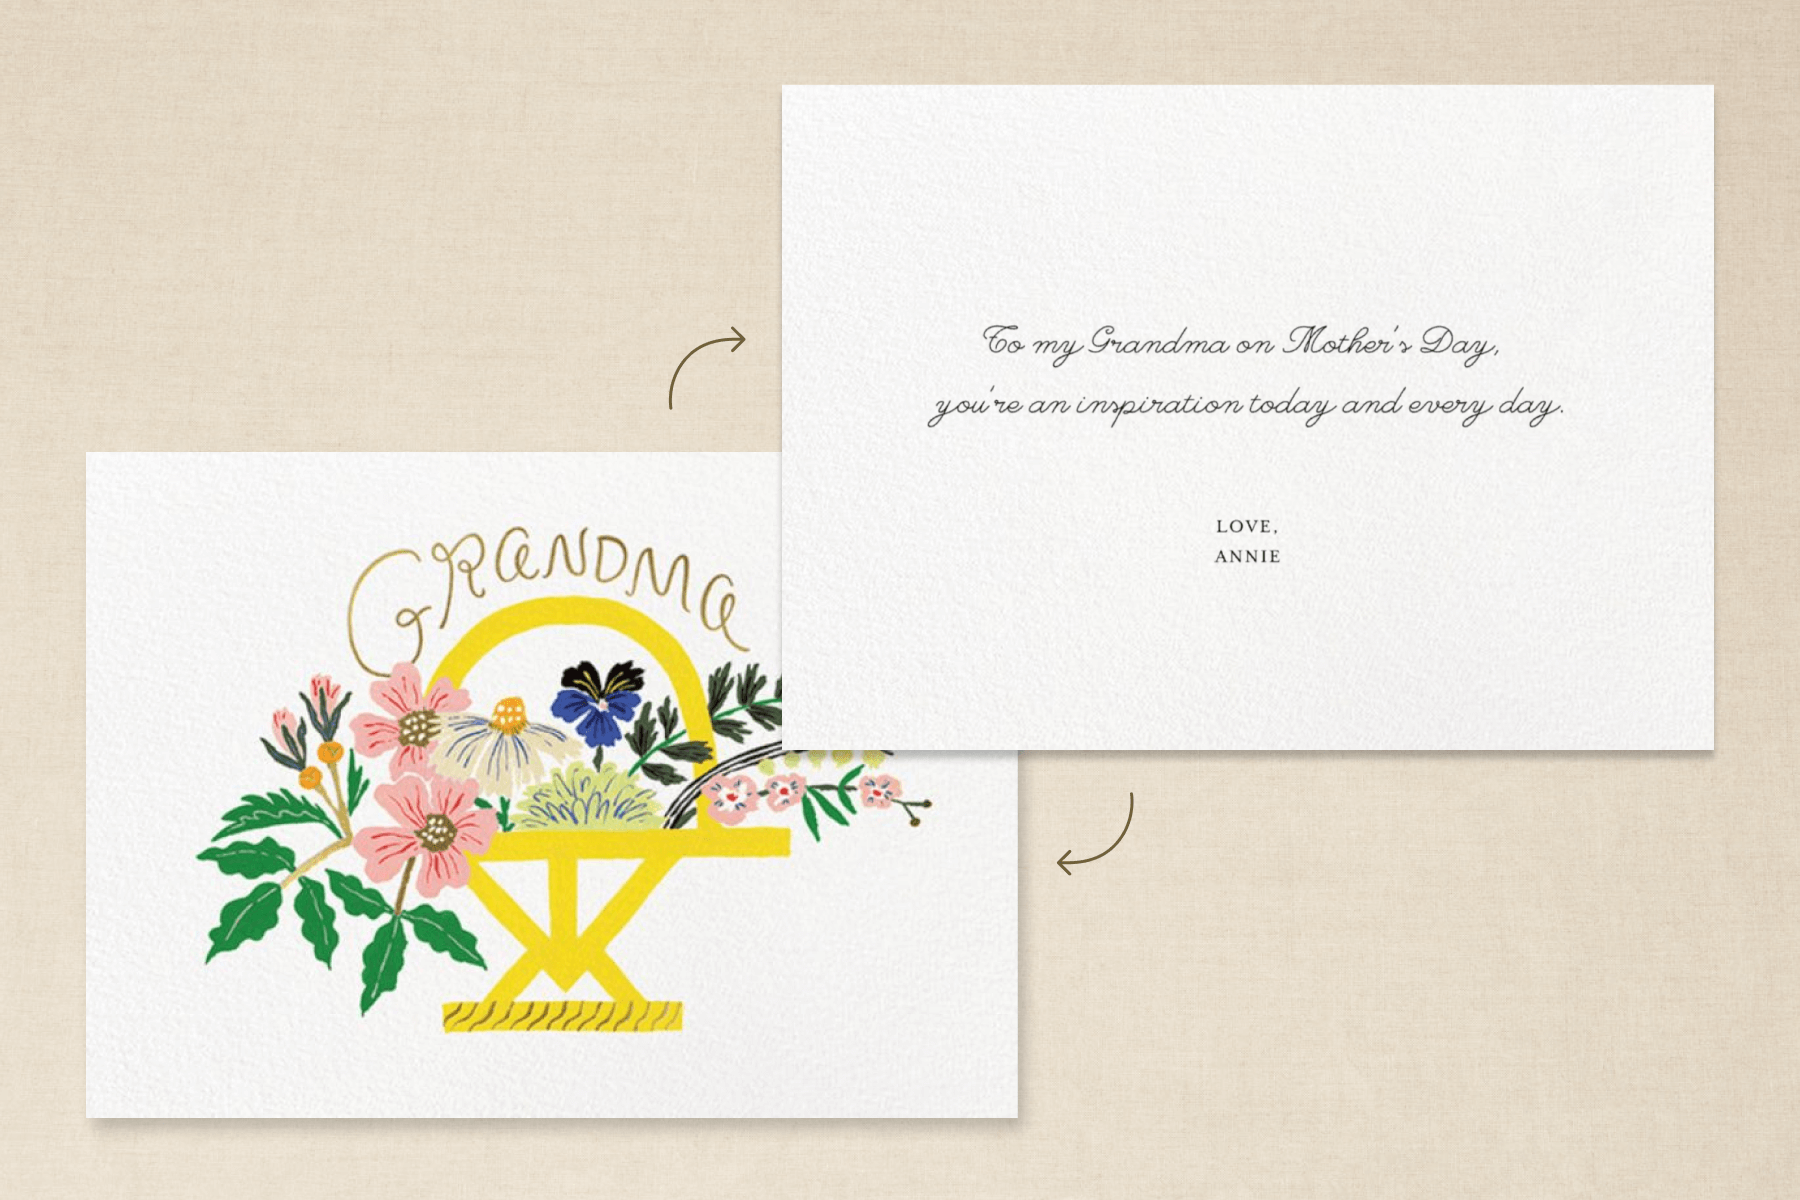 An illustrated floral Mother’s Day card showing one of the messages suggested below. The card reads “Grandma.”